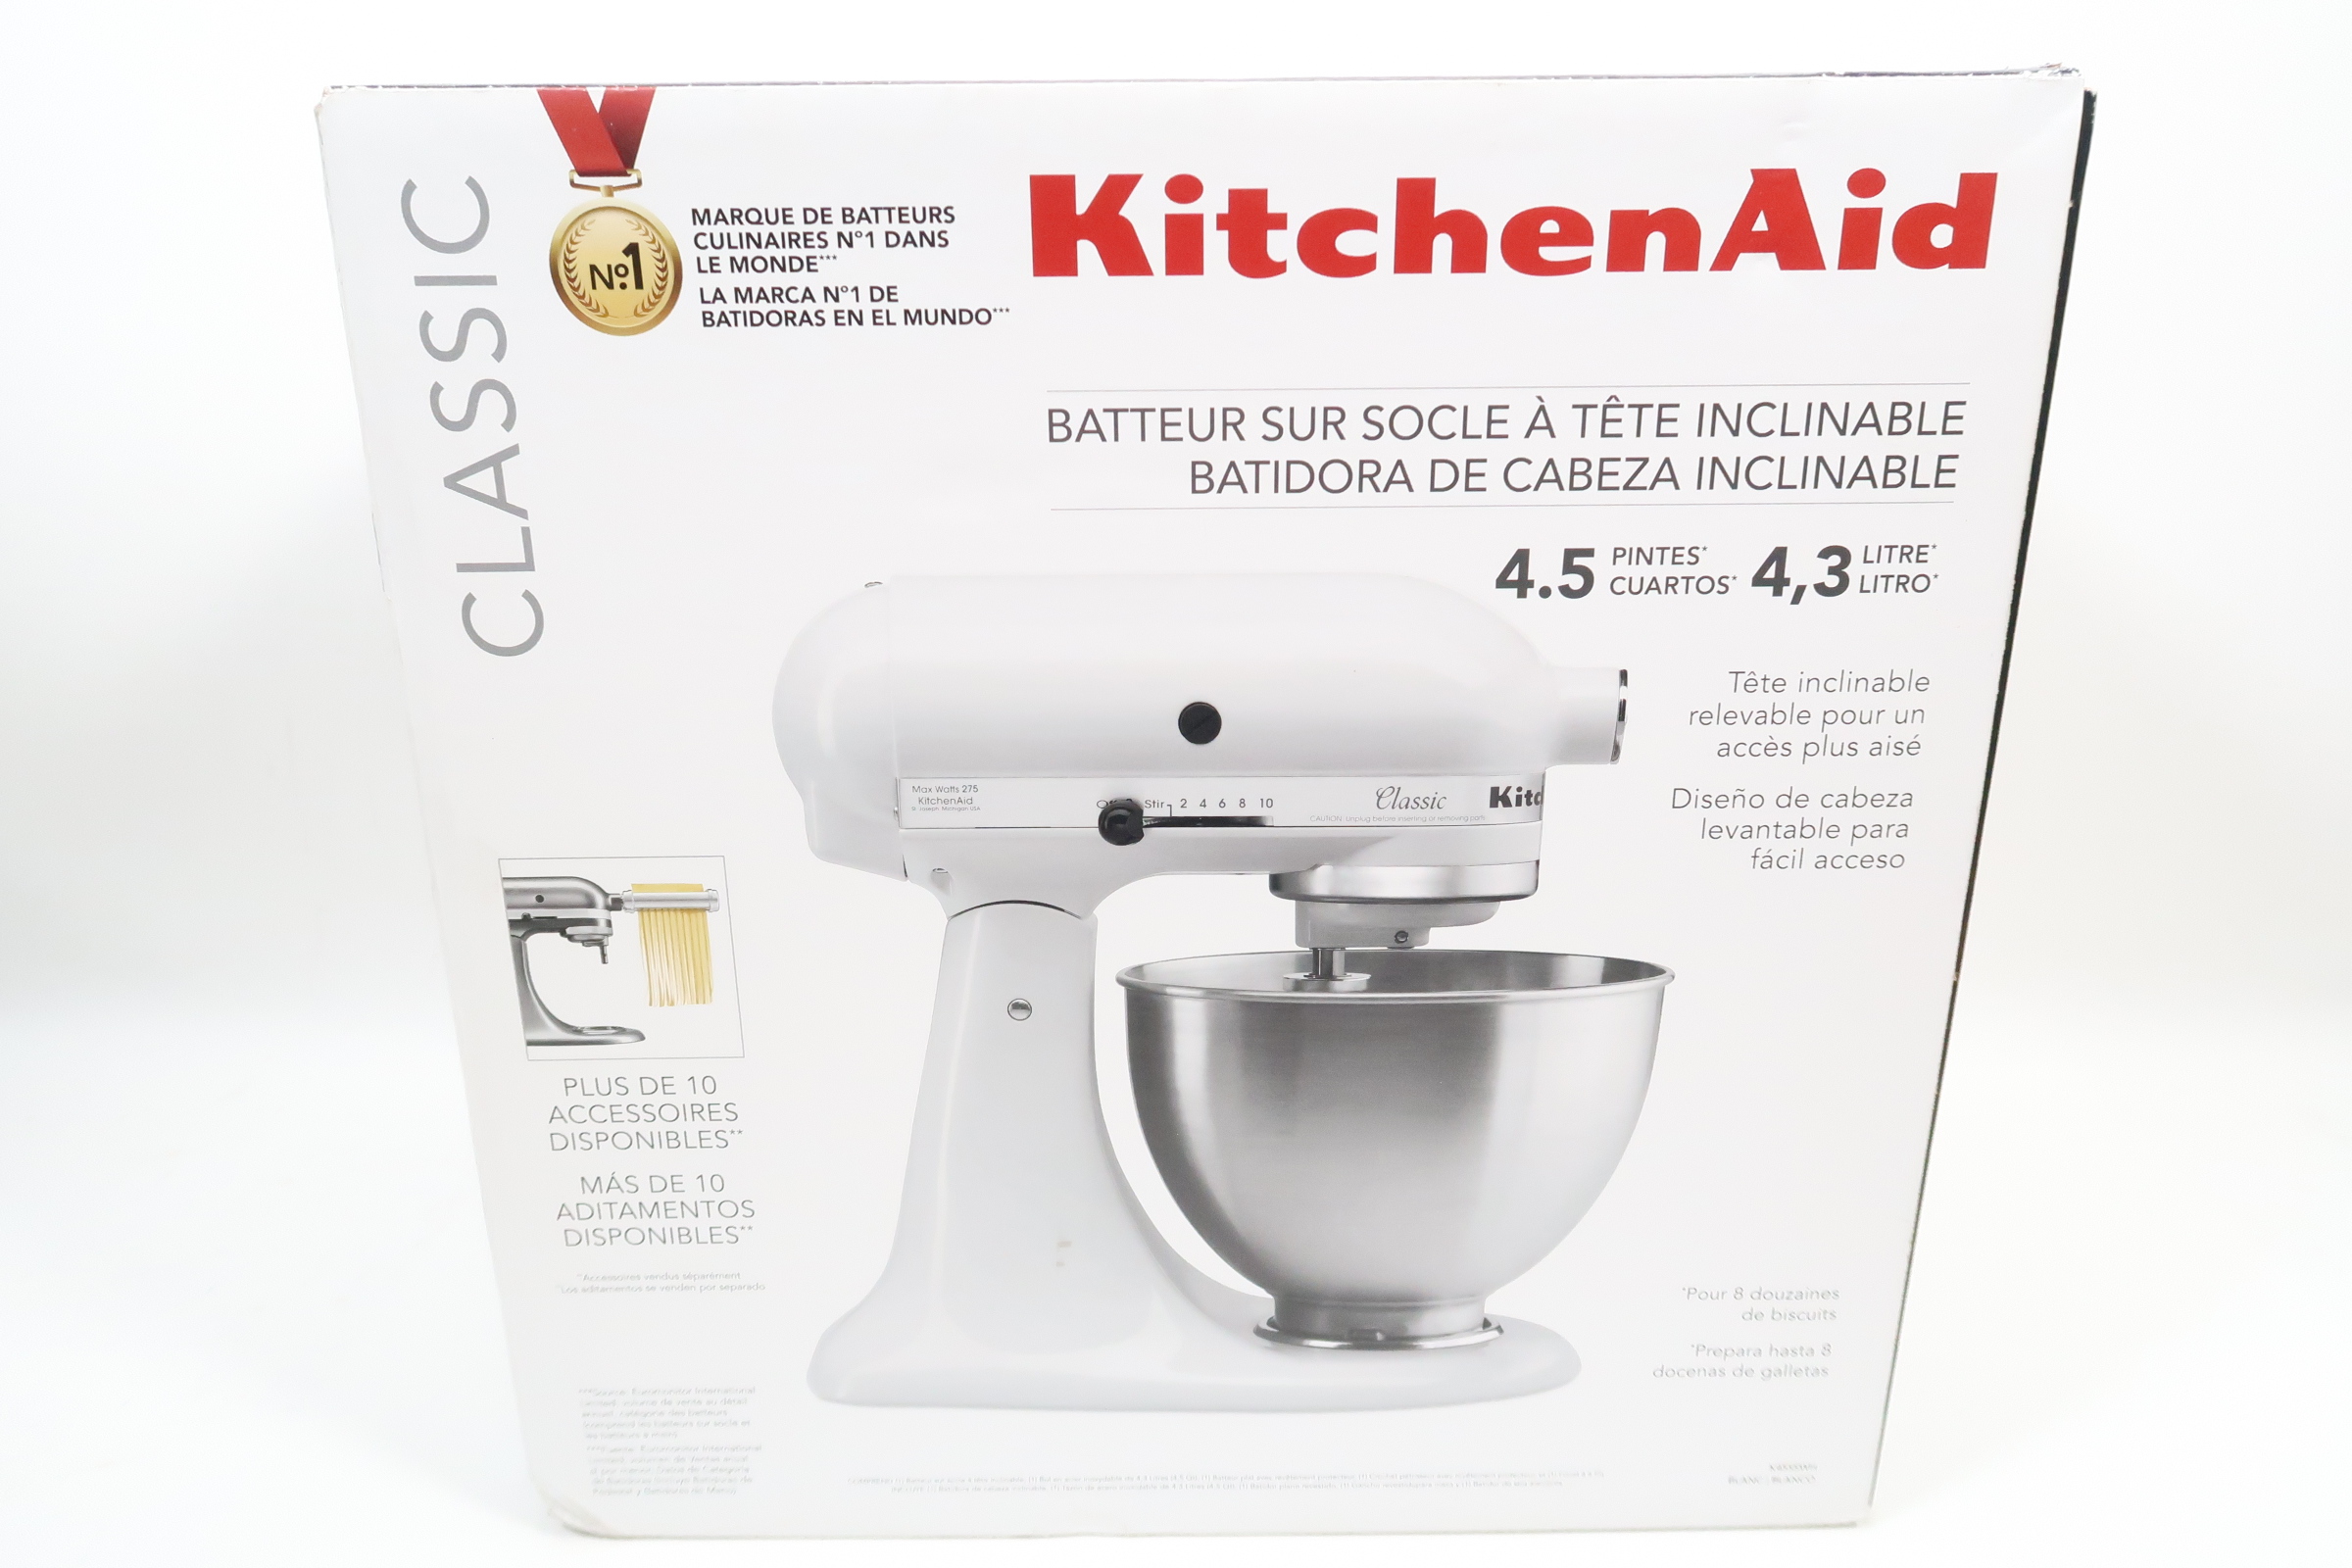 KitchenAid 4.5Q Stand Mixer Stainless Steel Whip/Whisk